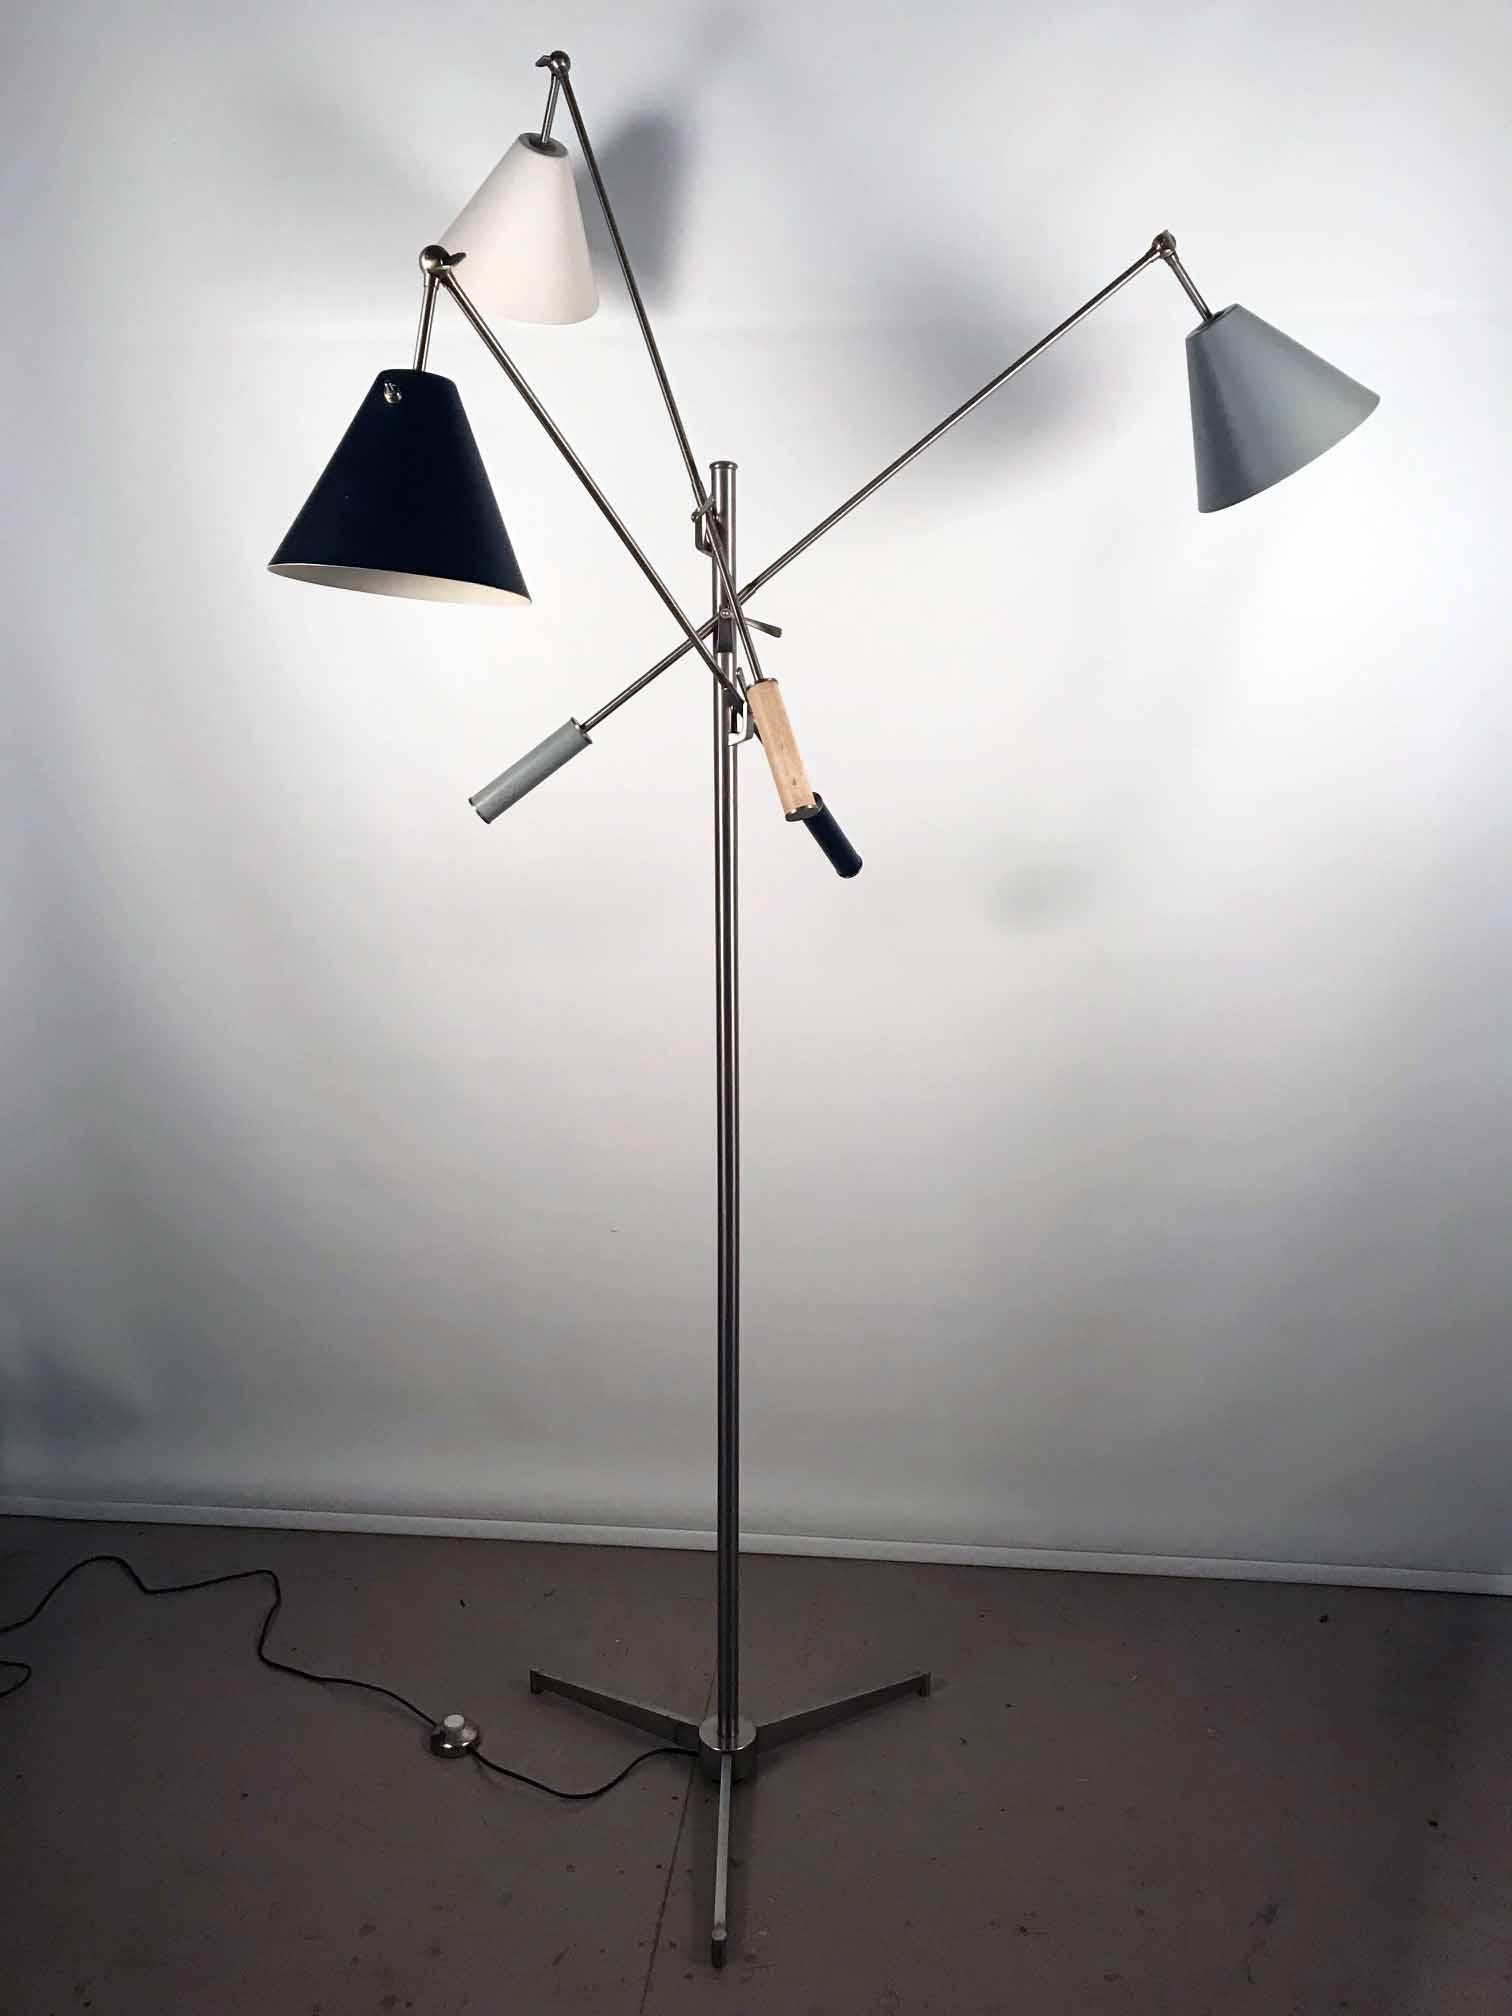 Angelo Lelli for Arredoluce; Triennale floor lamp, brass and enameled metal, Italy, circa 1953 

This iconic lamp was designed by Angello Lelli for Arredoluce in Italy in 1953. It has three shades, black, white and green, each mounted on a long